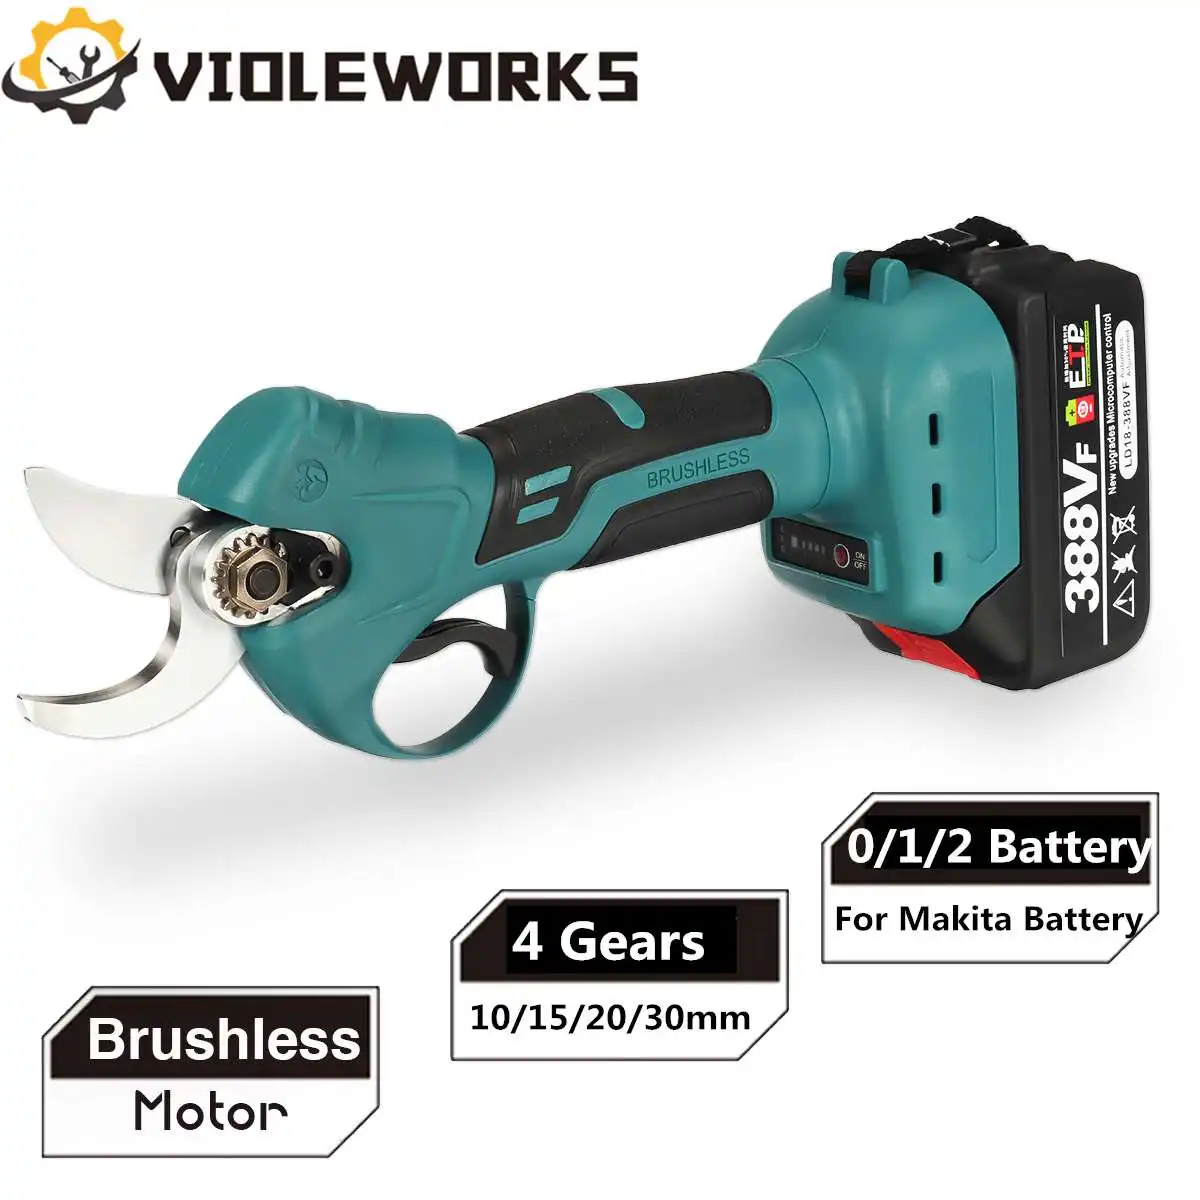 Brushless Electric Pruning Shear 4 Gears Cordless Pruner Garden Fruit Tree Branches Cutter For Makita 18V Battery by VIOLEWORKS